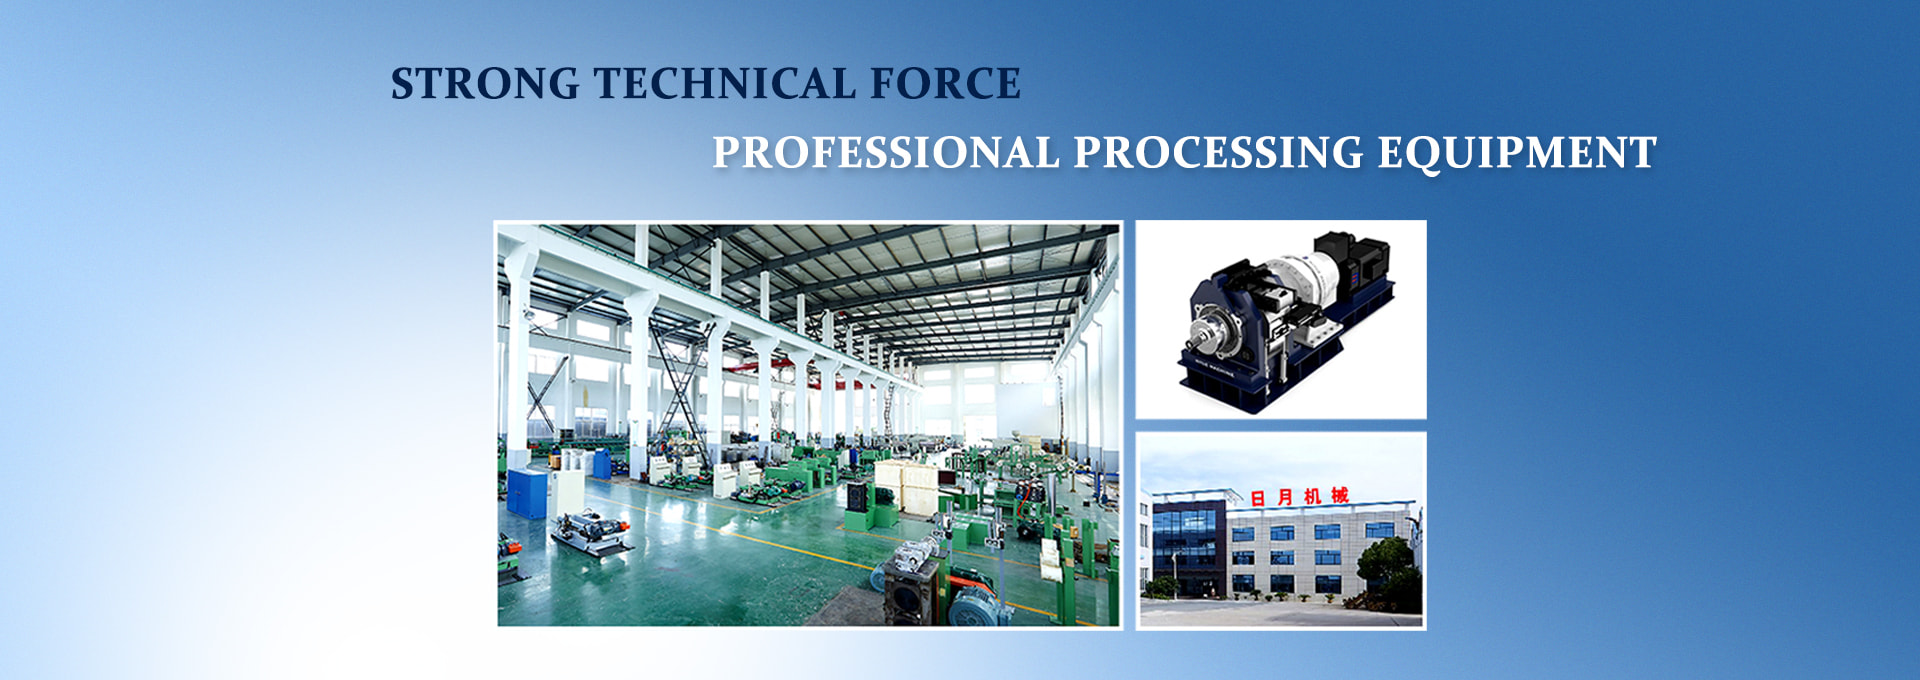 STRONG TECHNICAL FORCE       PROFESSIONAL PROCESSING EQUIPMENT